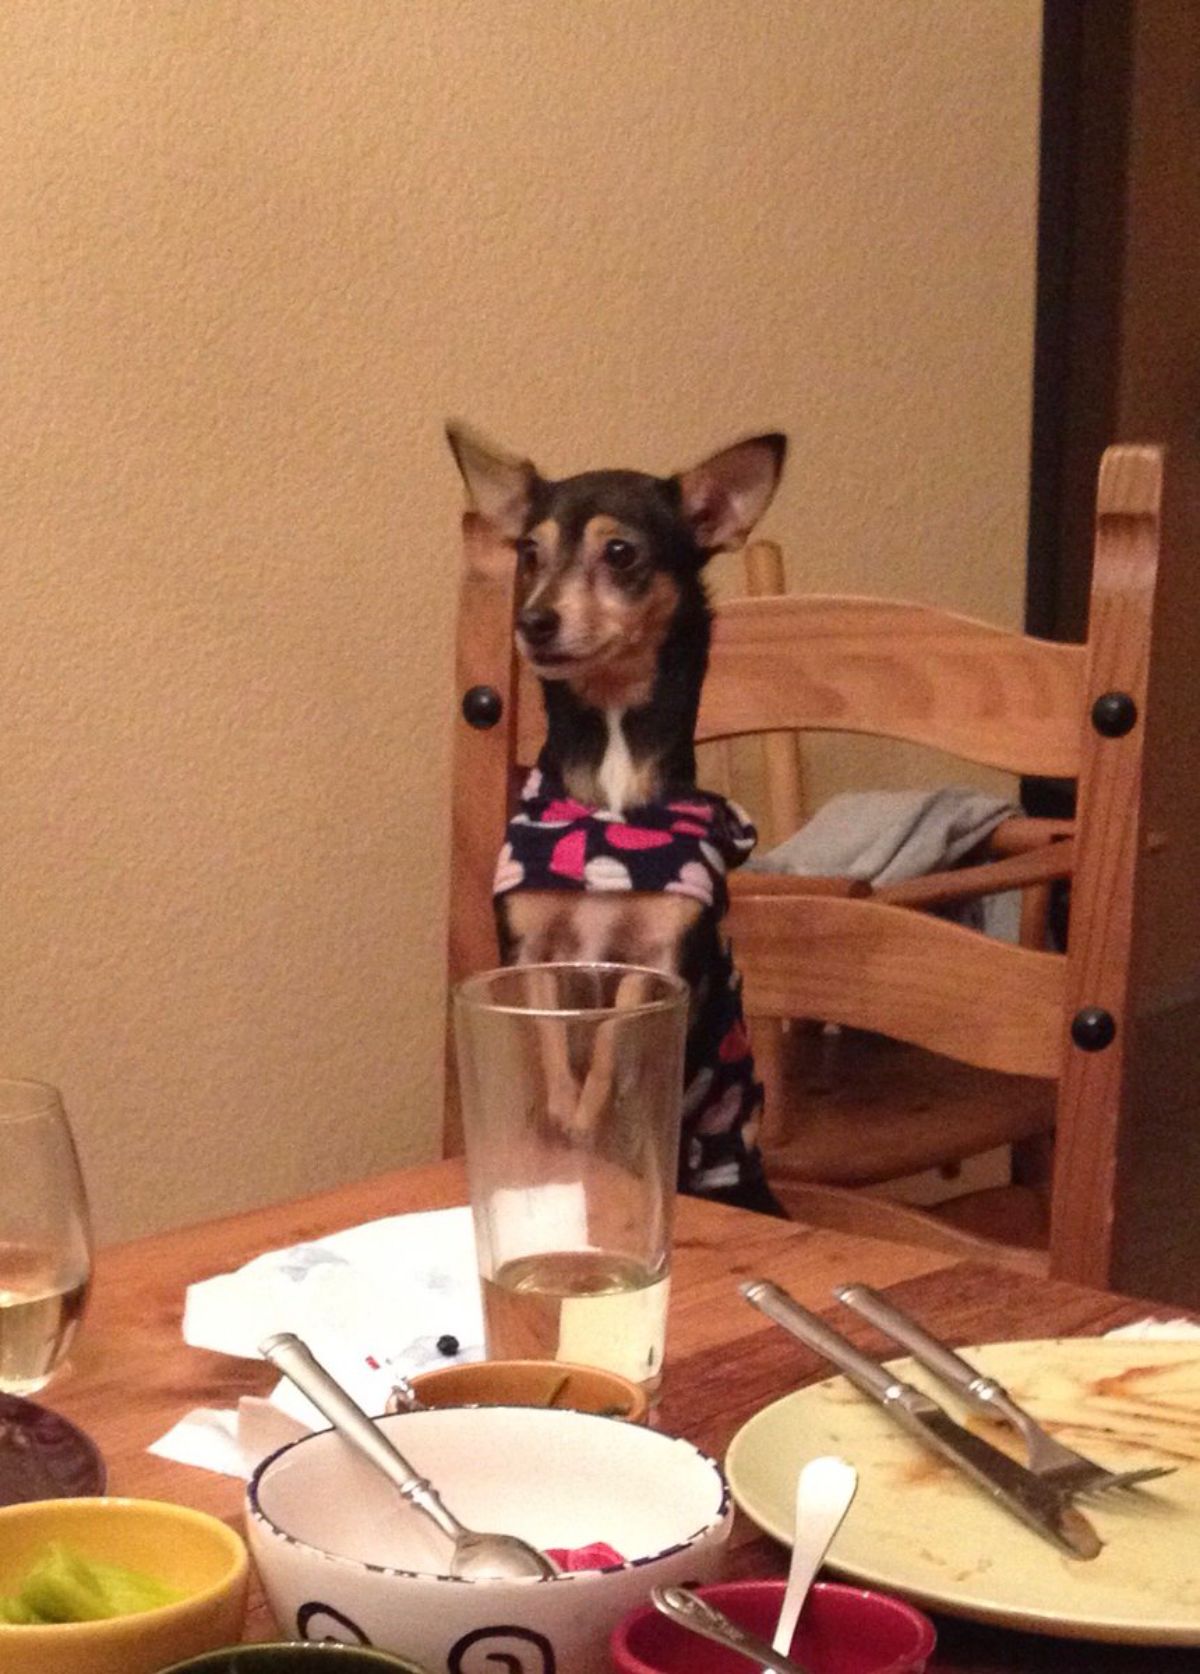 black and brown dog standing on hind legs on a wooden chair and the front legs seen through a glass on a wooden table